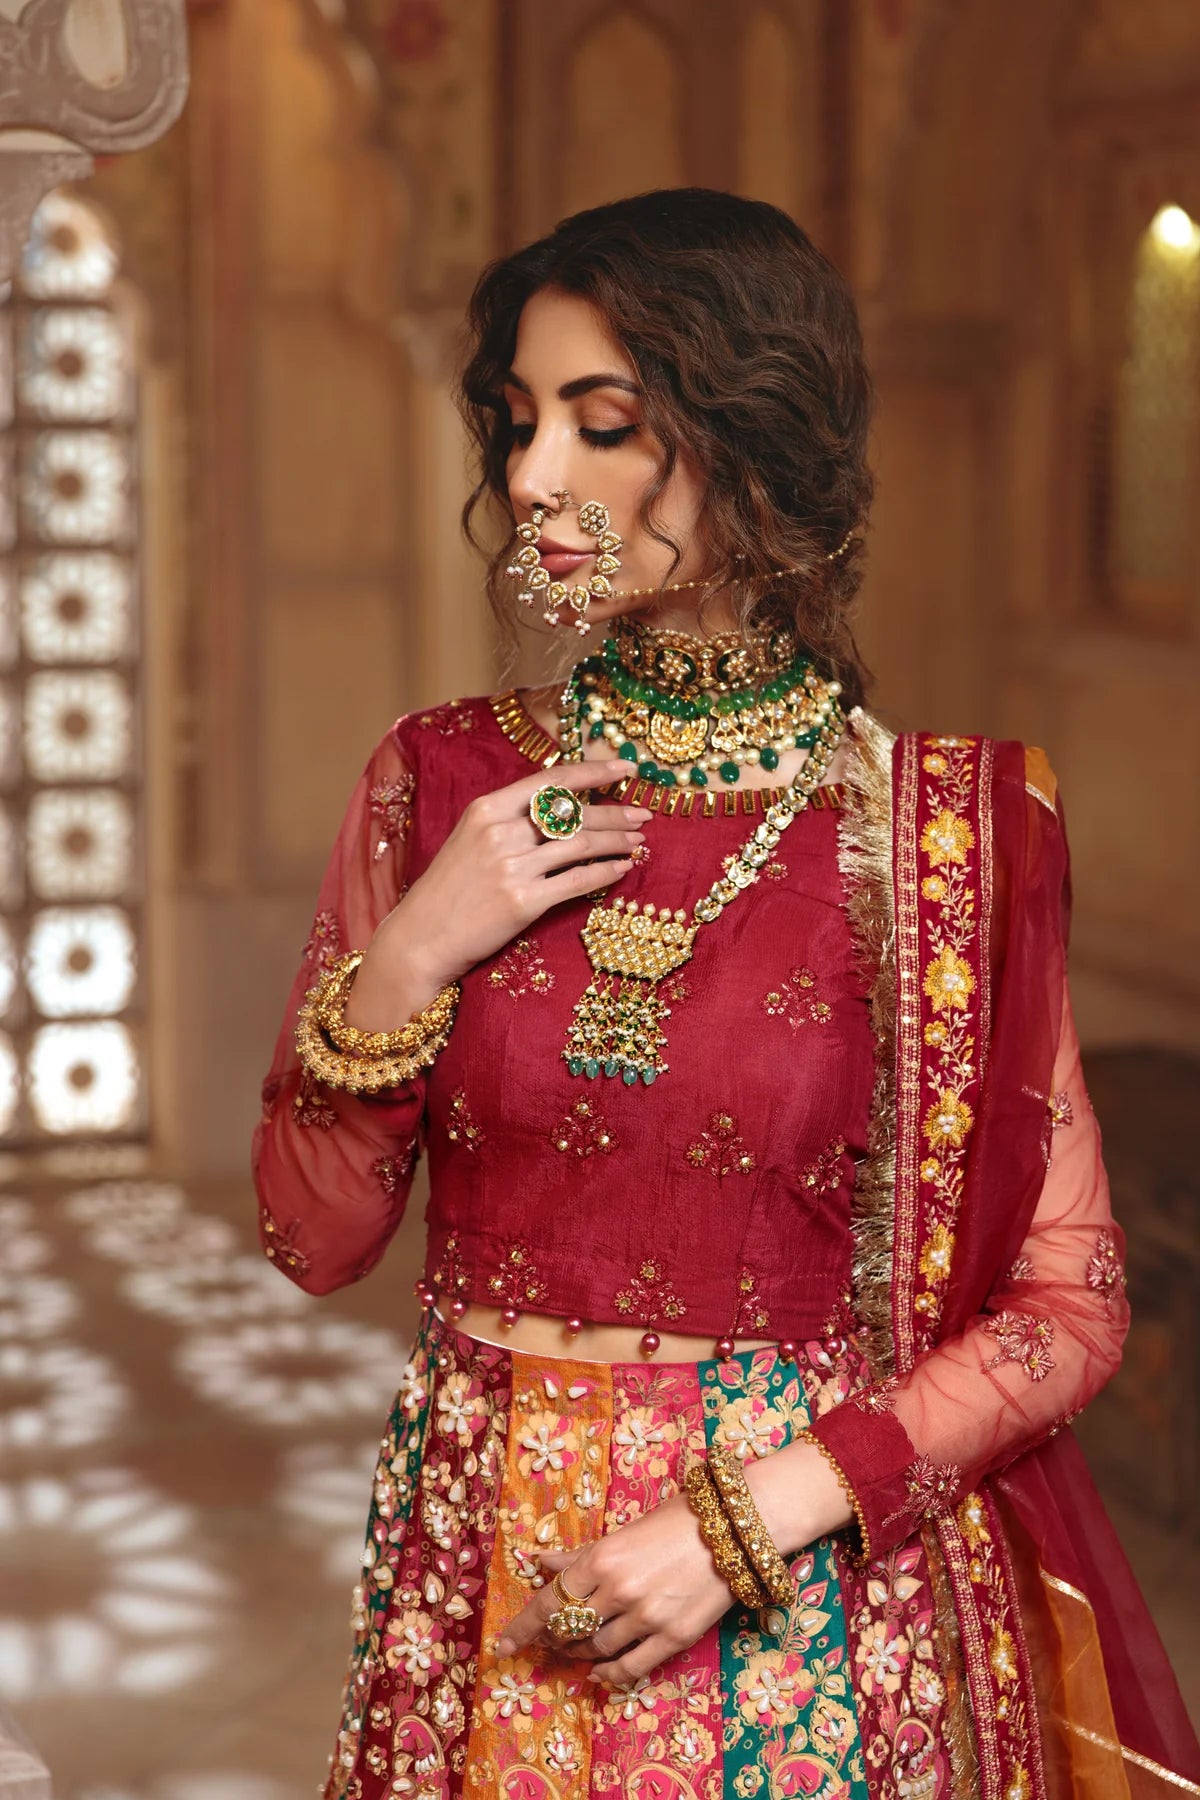 NineColours: Treat Yourself with Exquisite 'Made to Order' Lehenga Choli  with worldwide Free Shipping😍 | Milled